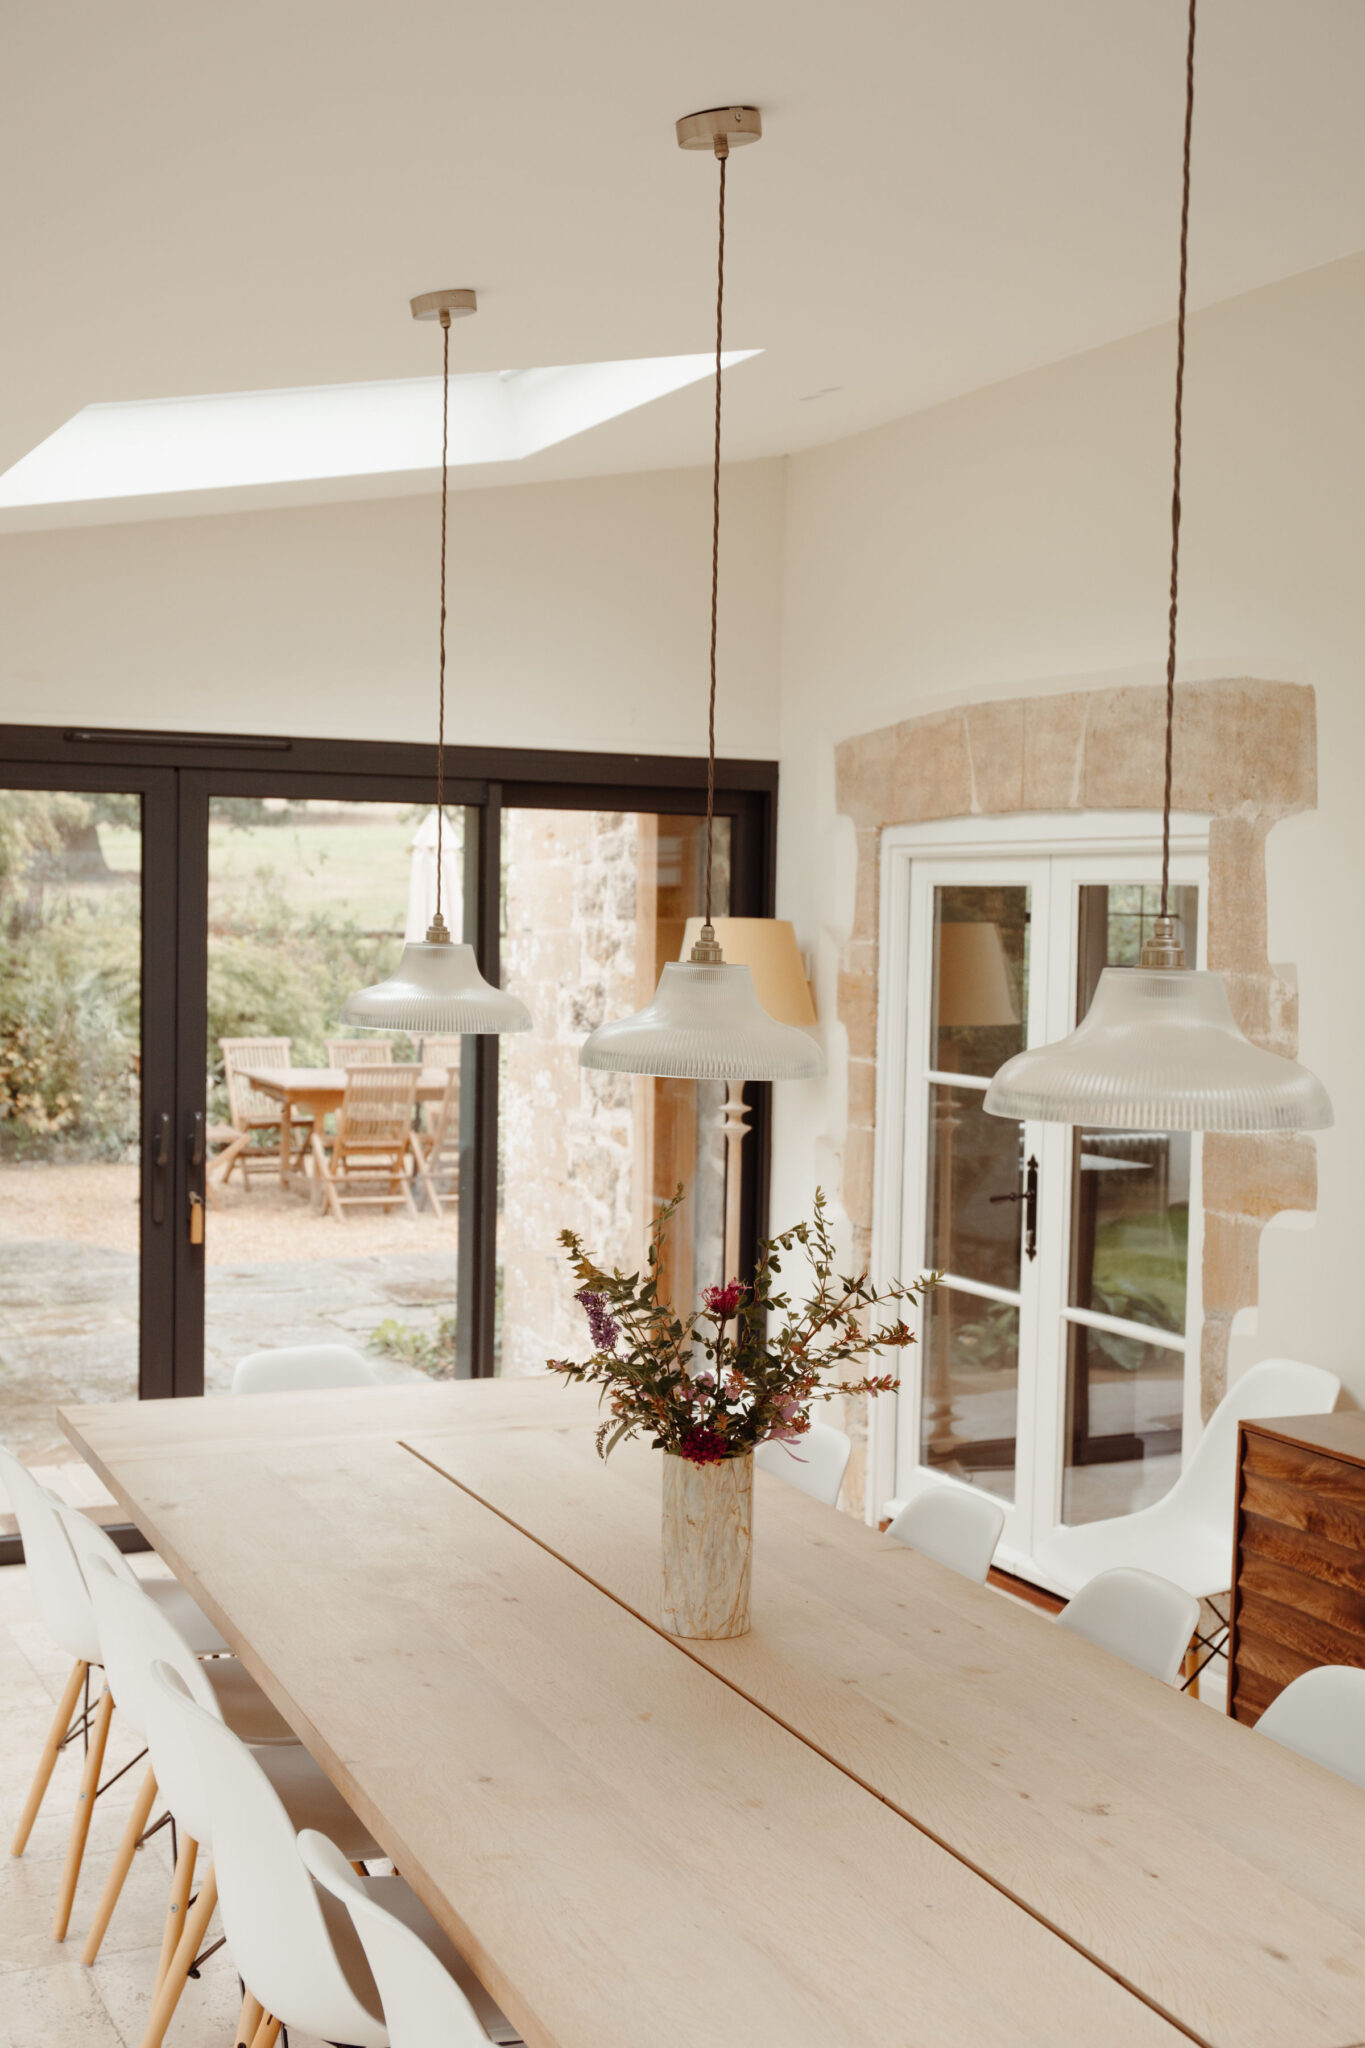 Dining table area in extension of the house with a skylight